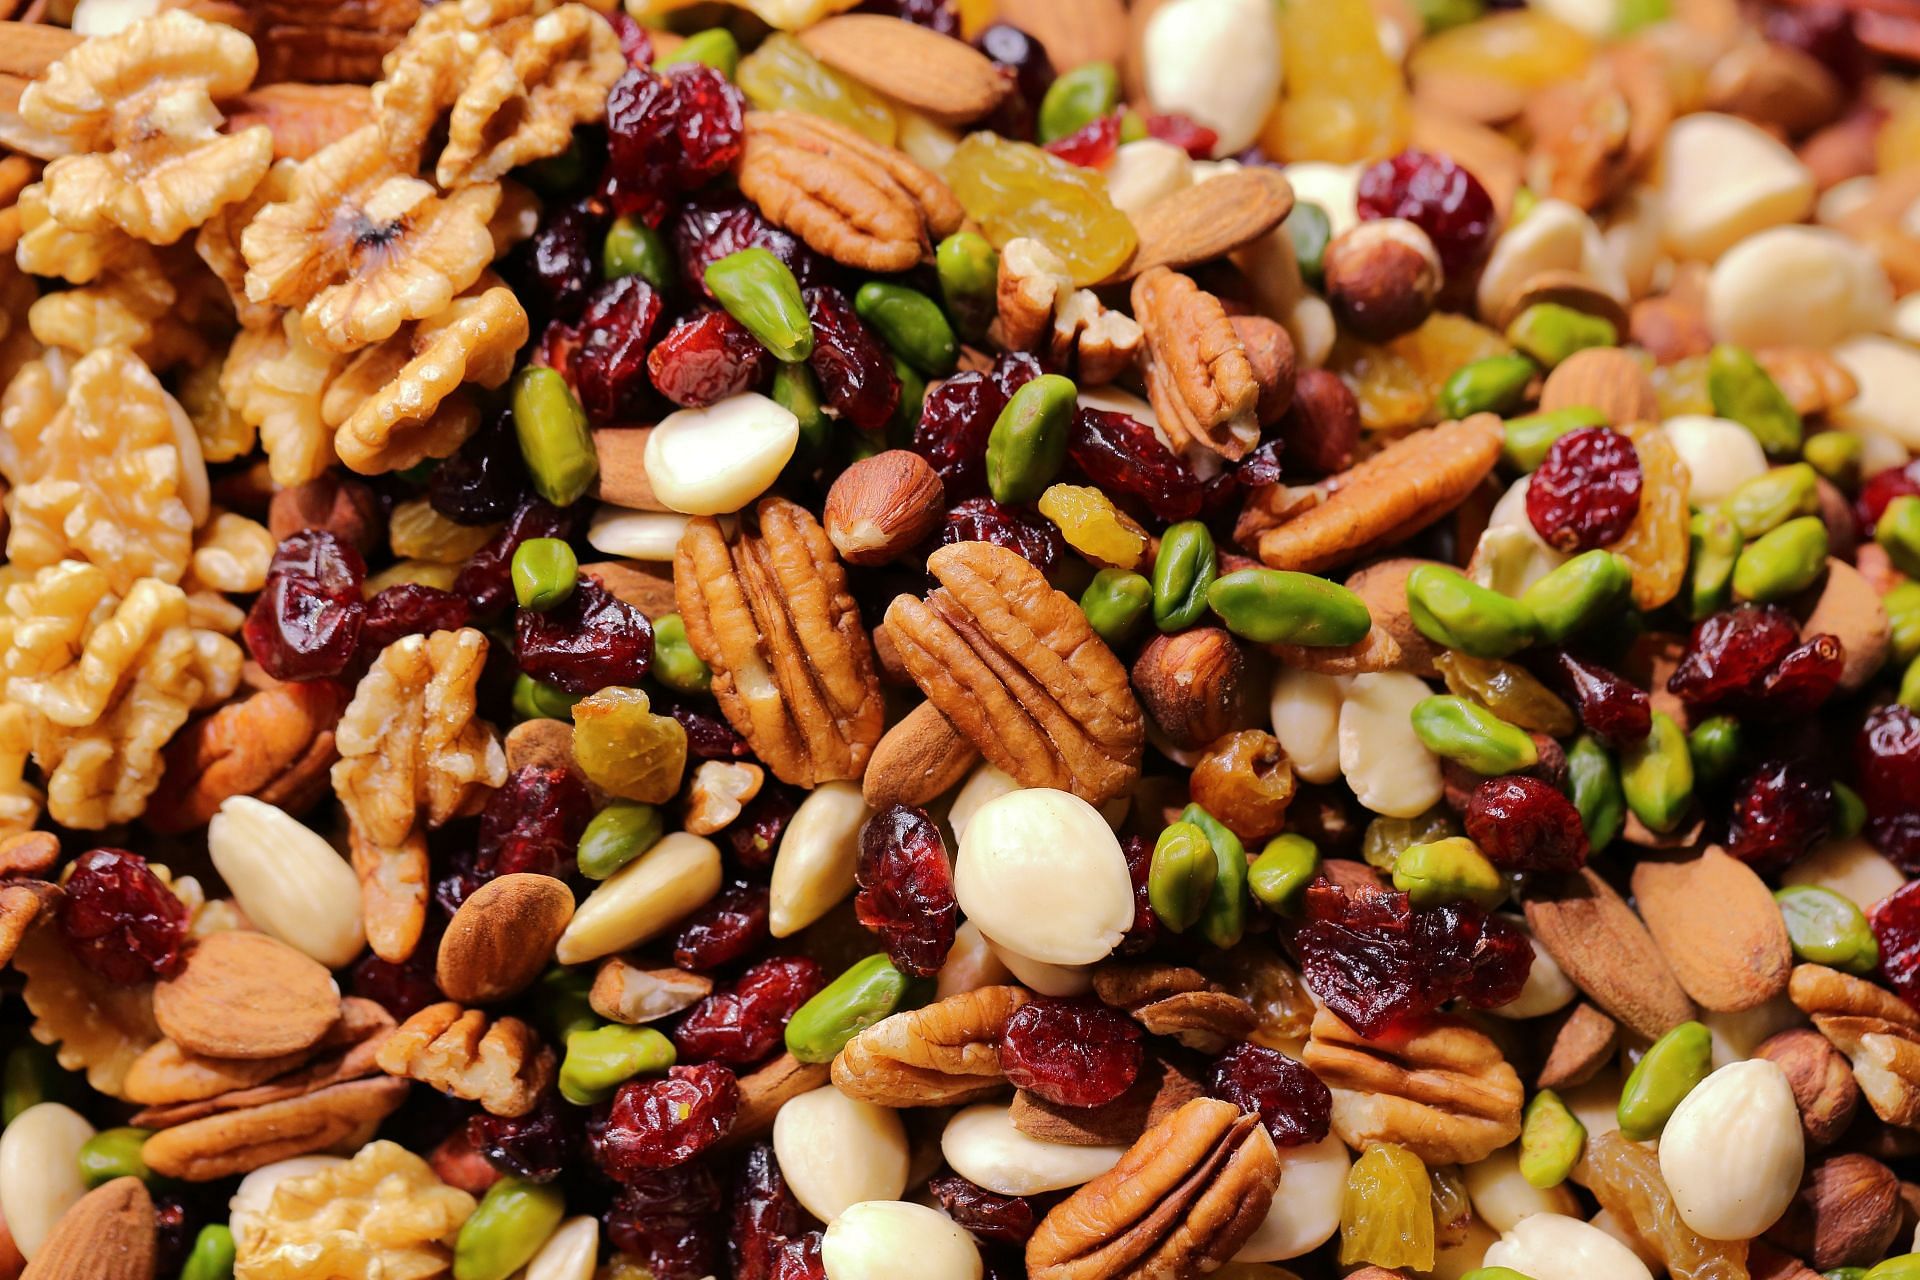 Nuts and seeds can be used to prepare various high-protein snacks. (Image via Unsplash/Maksim Shutov)